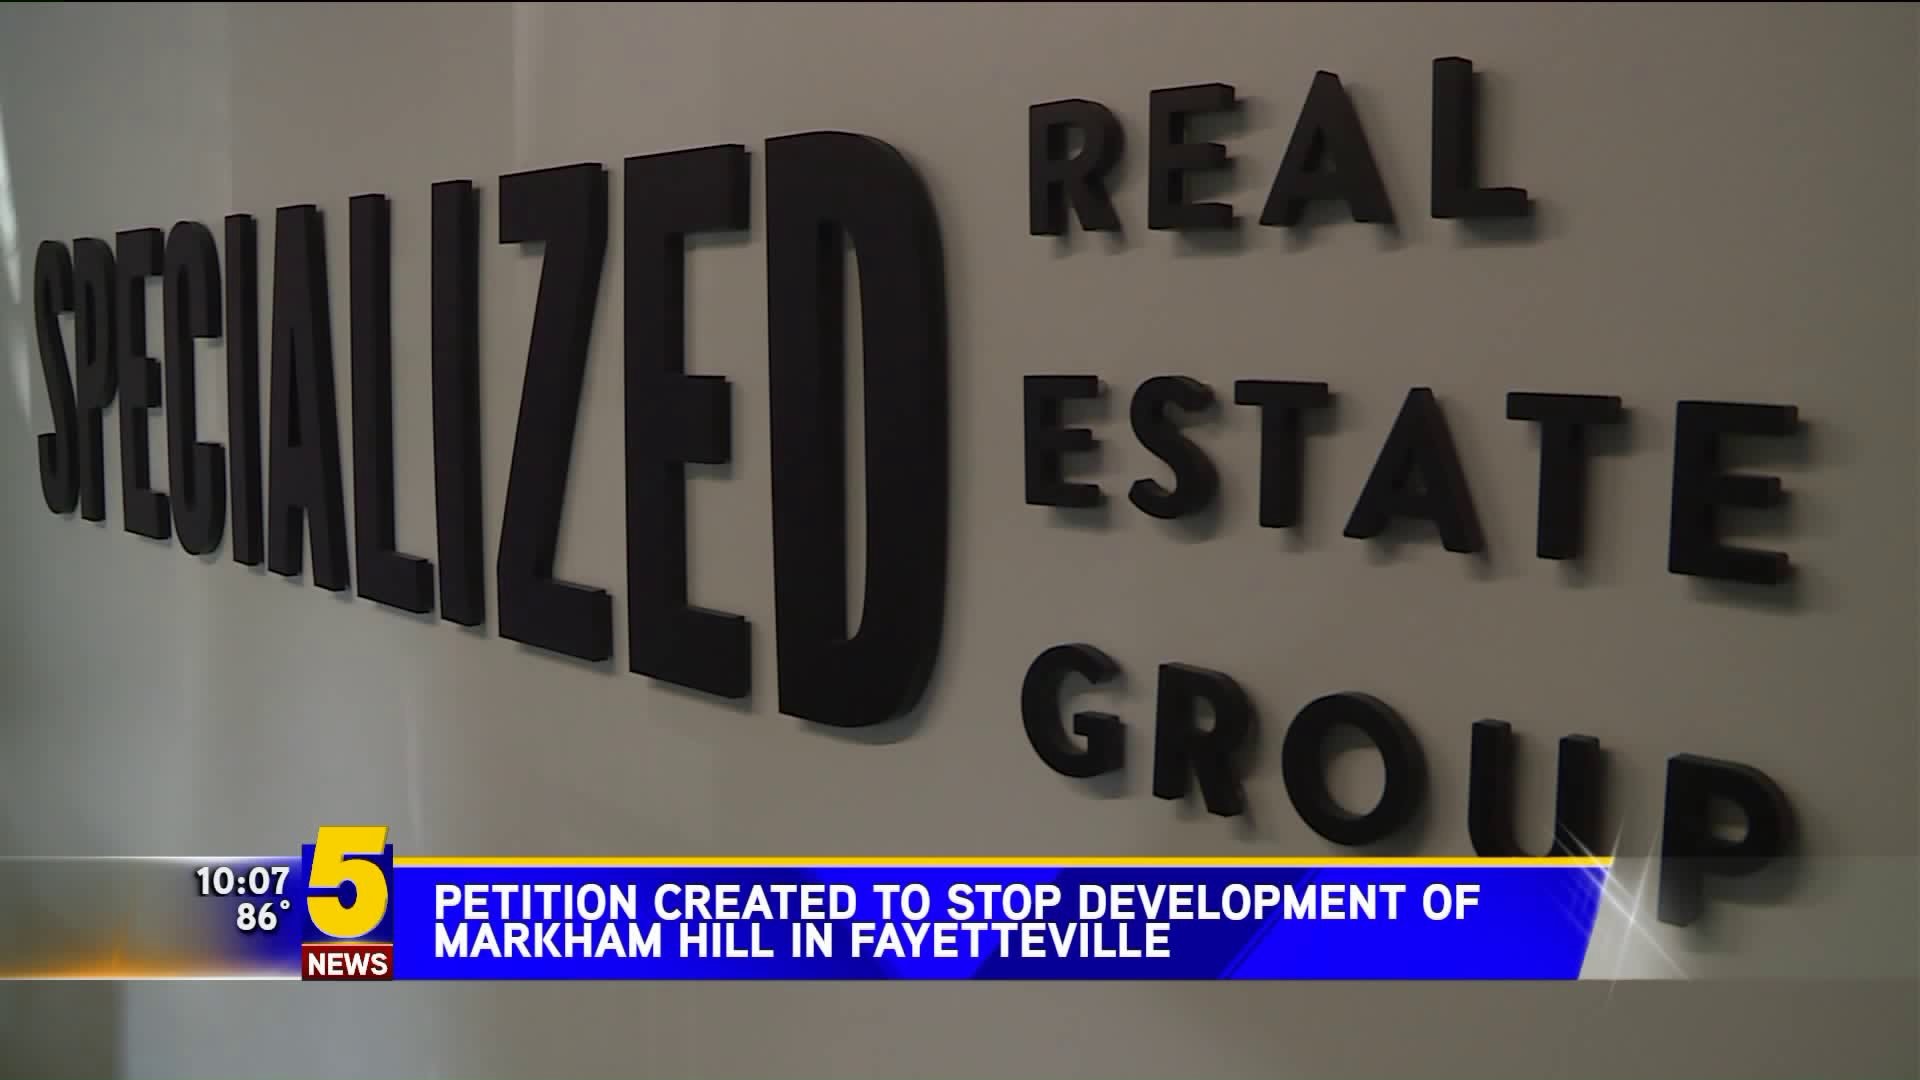 Petition Created To Stop Development Of Markham Hill In Fayetteville